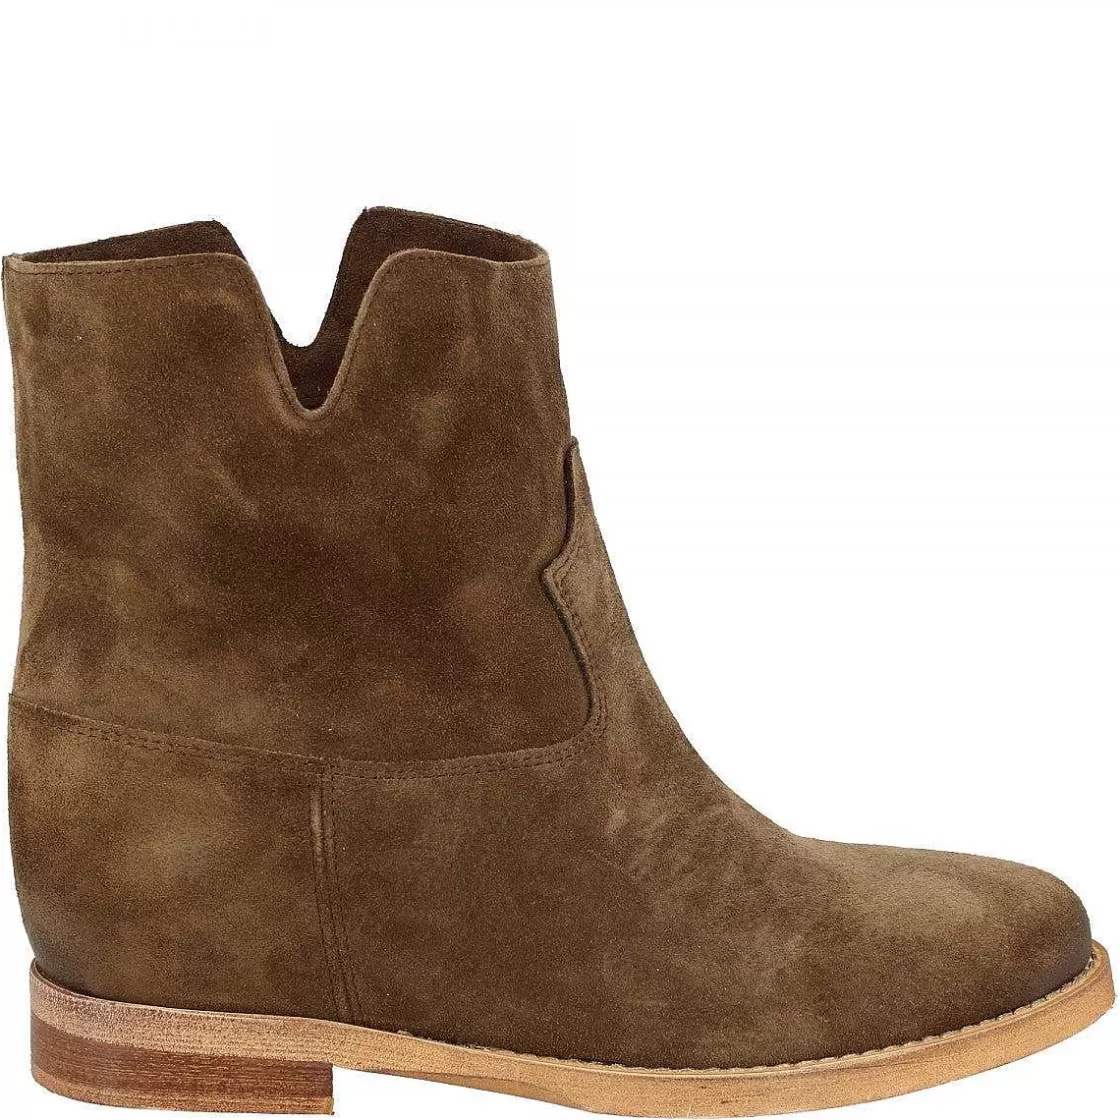 Leonardo Women'S Handmade Ankle Boots With Internal Platform In Brown Suede Leather Shop